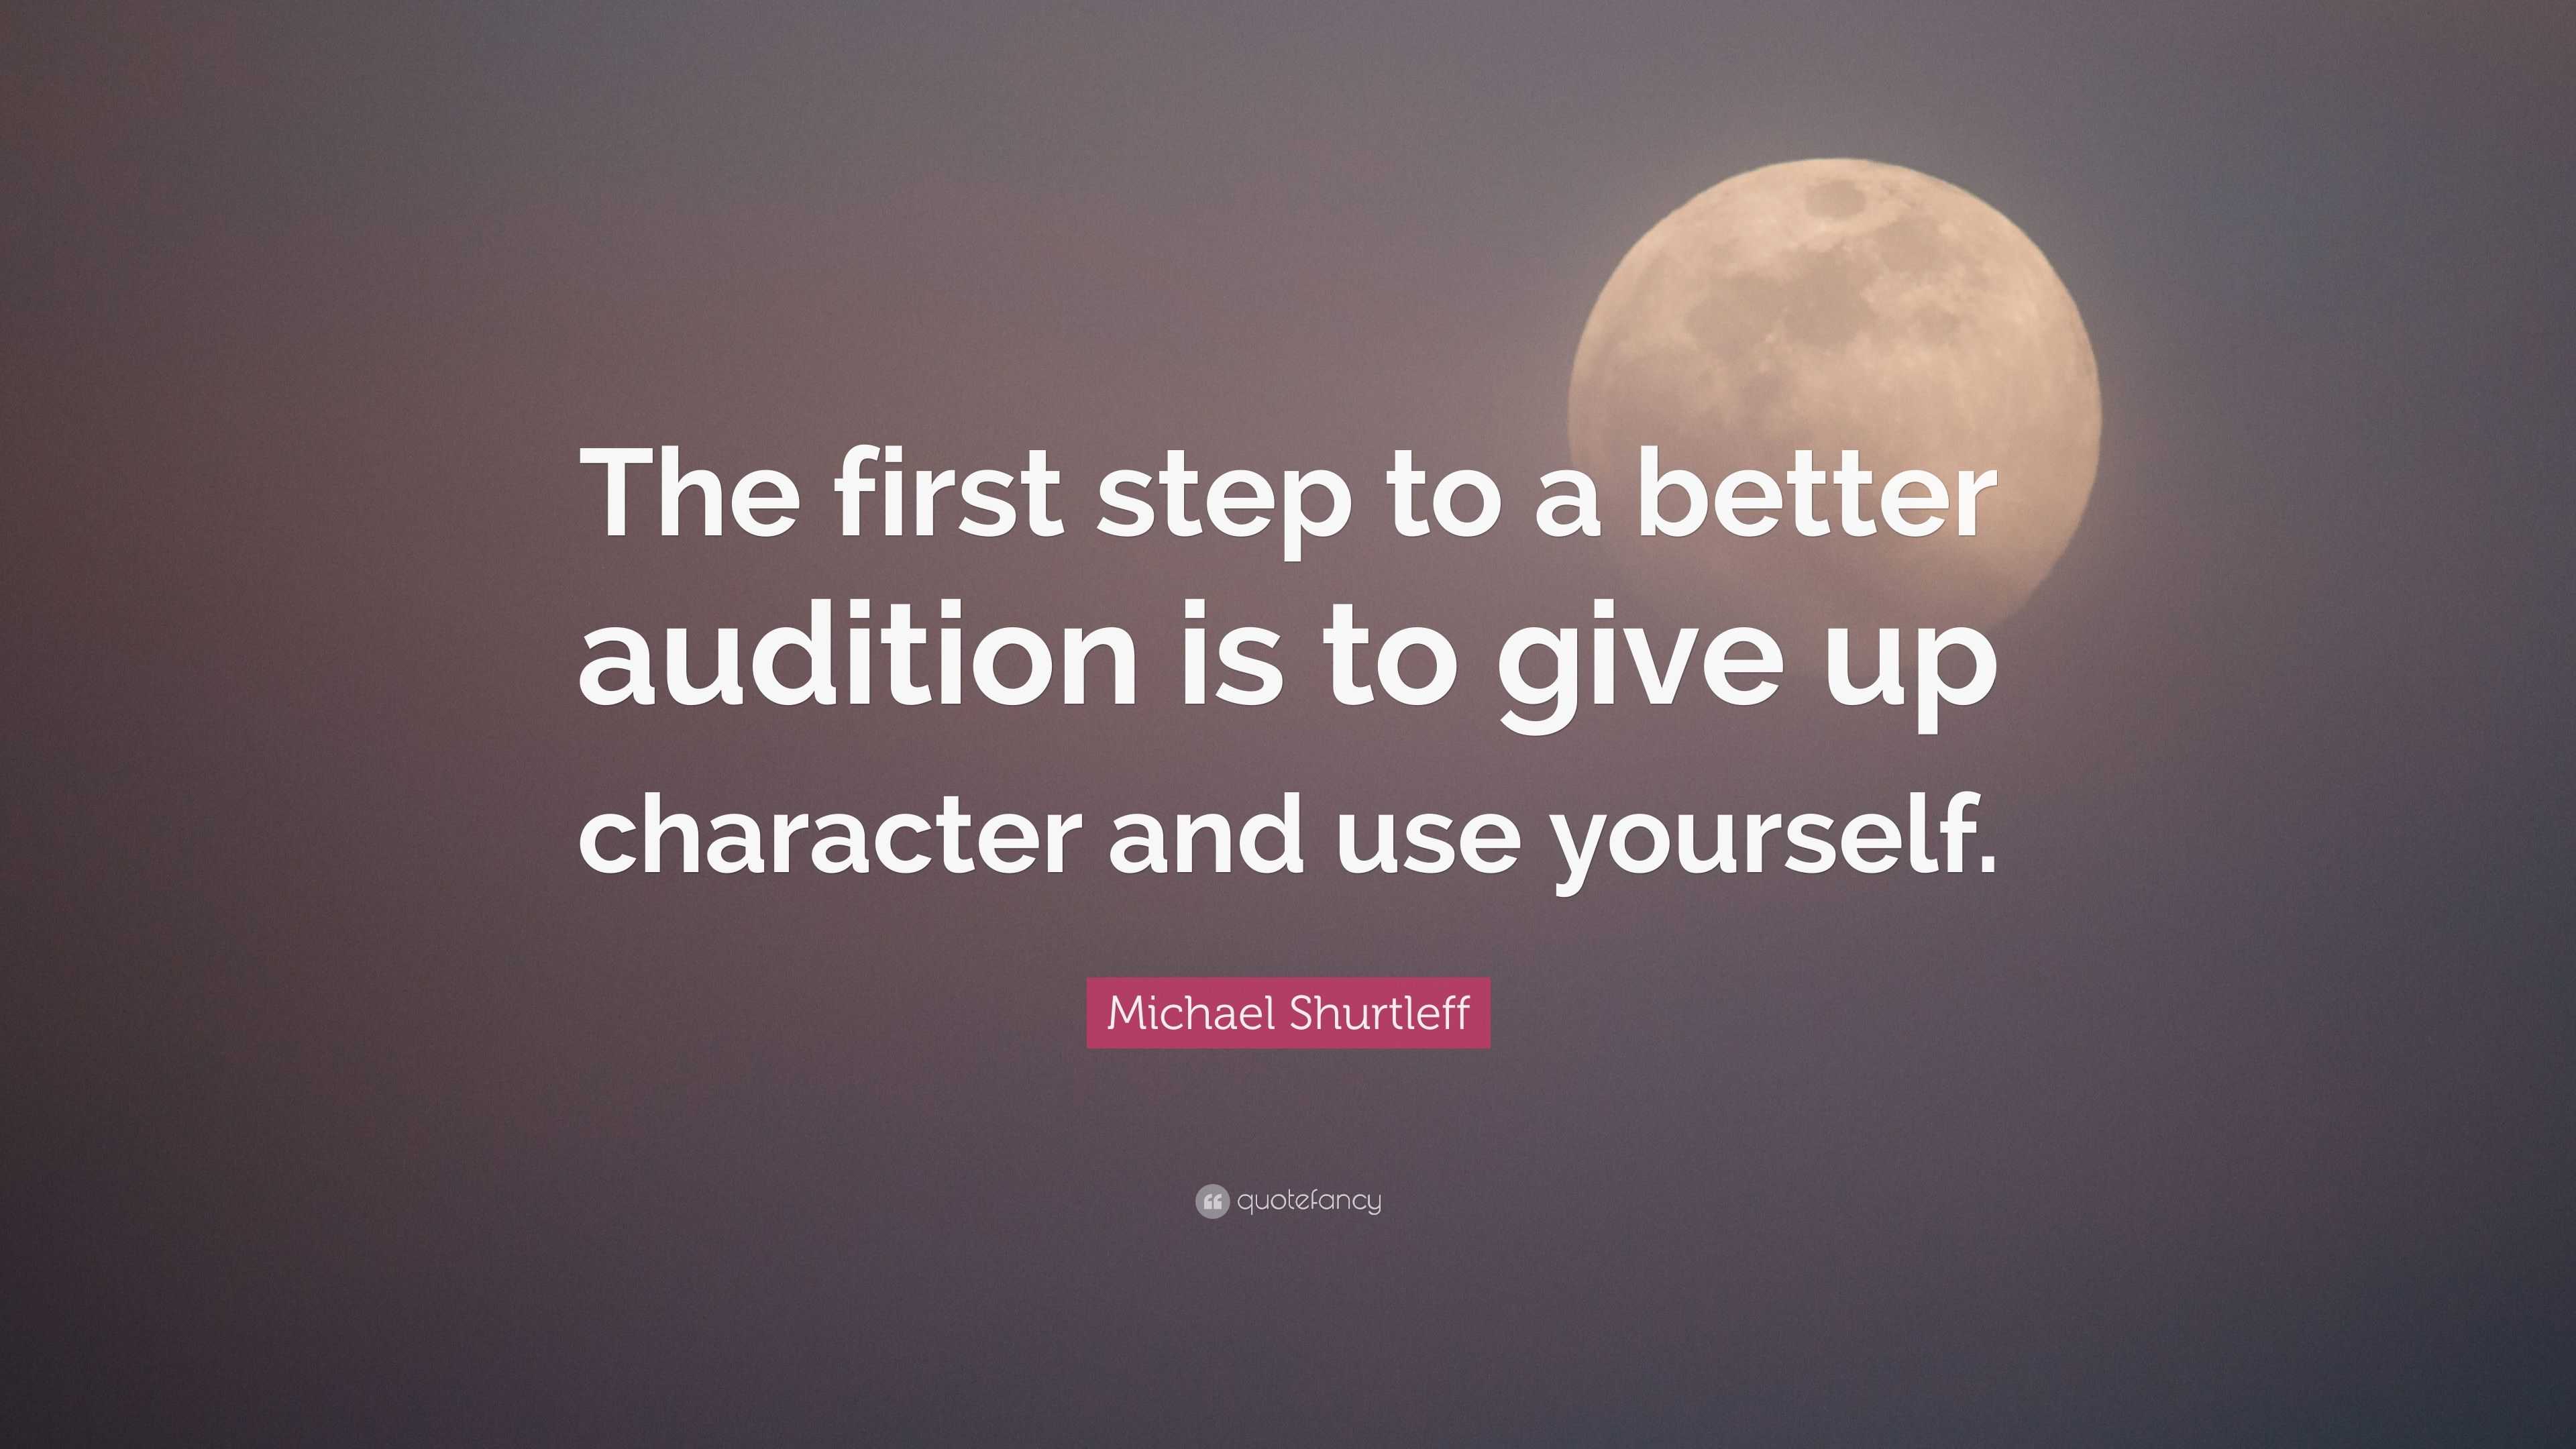 buy audition by michael shurtleff